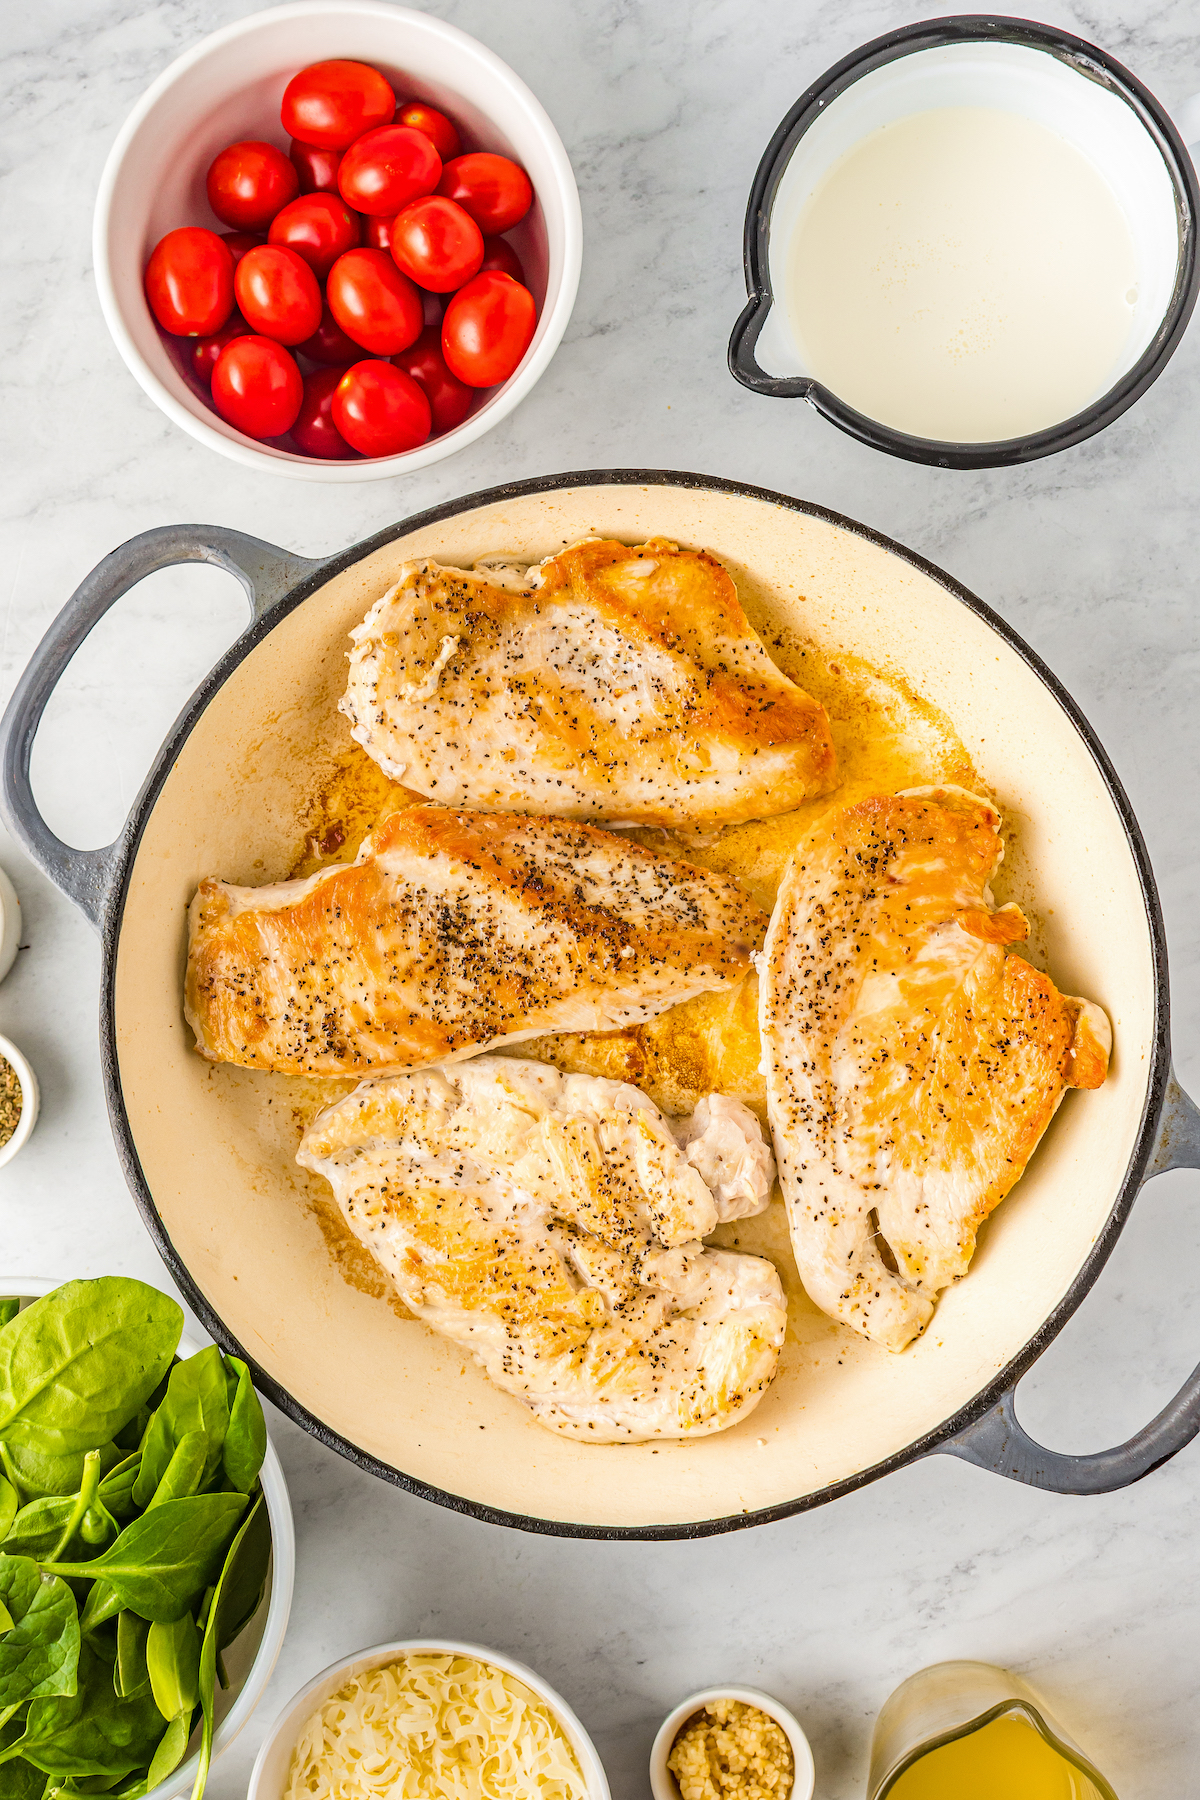 Sauteed chicken breast in a skillet.